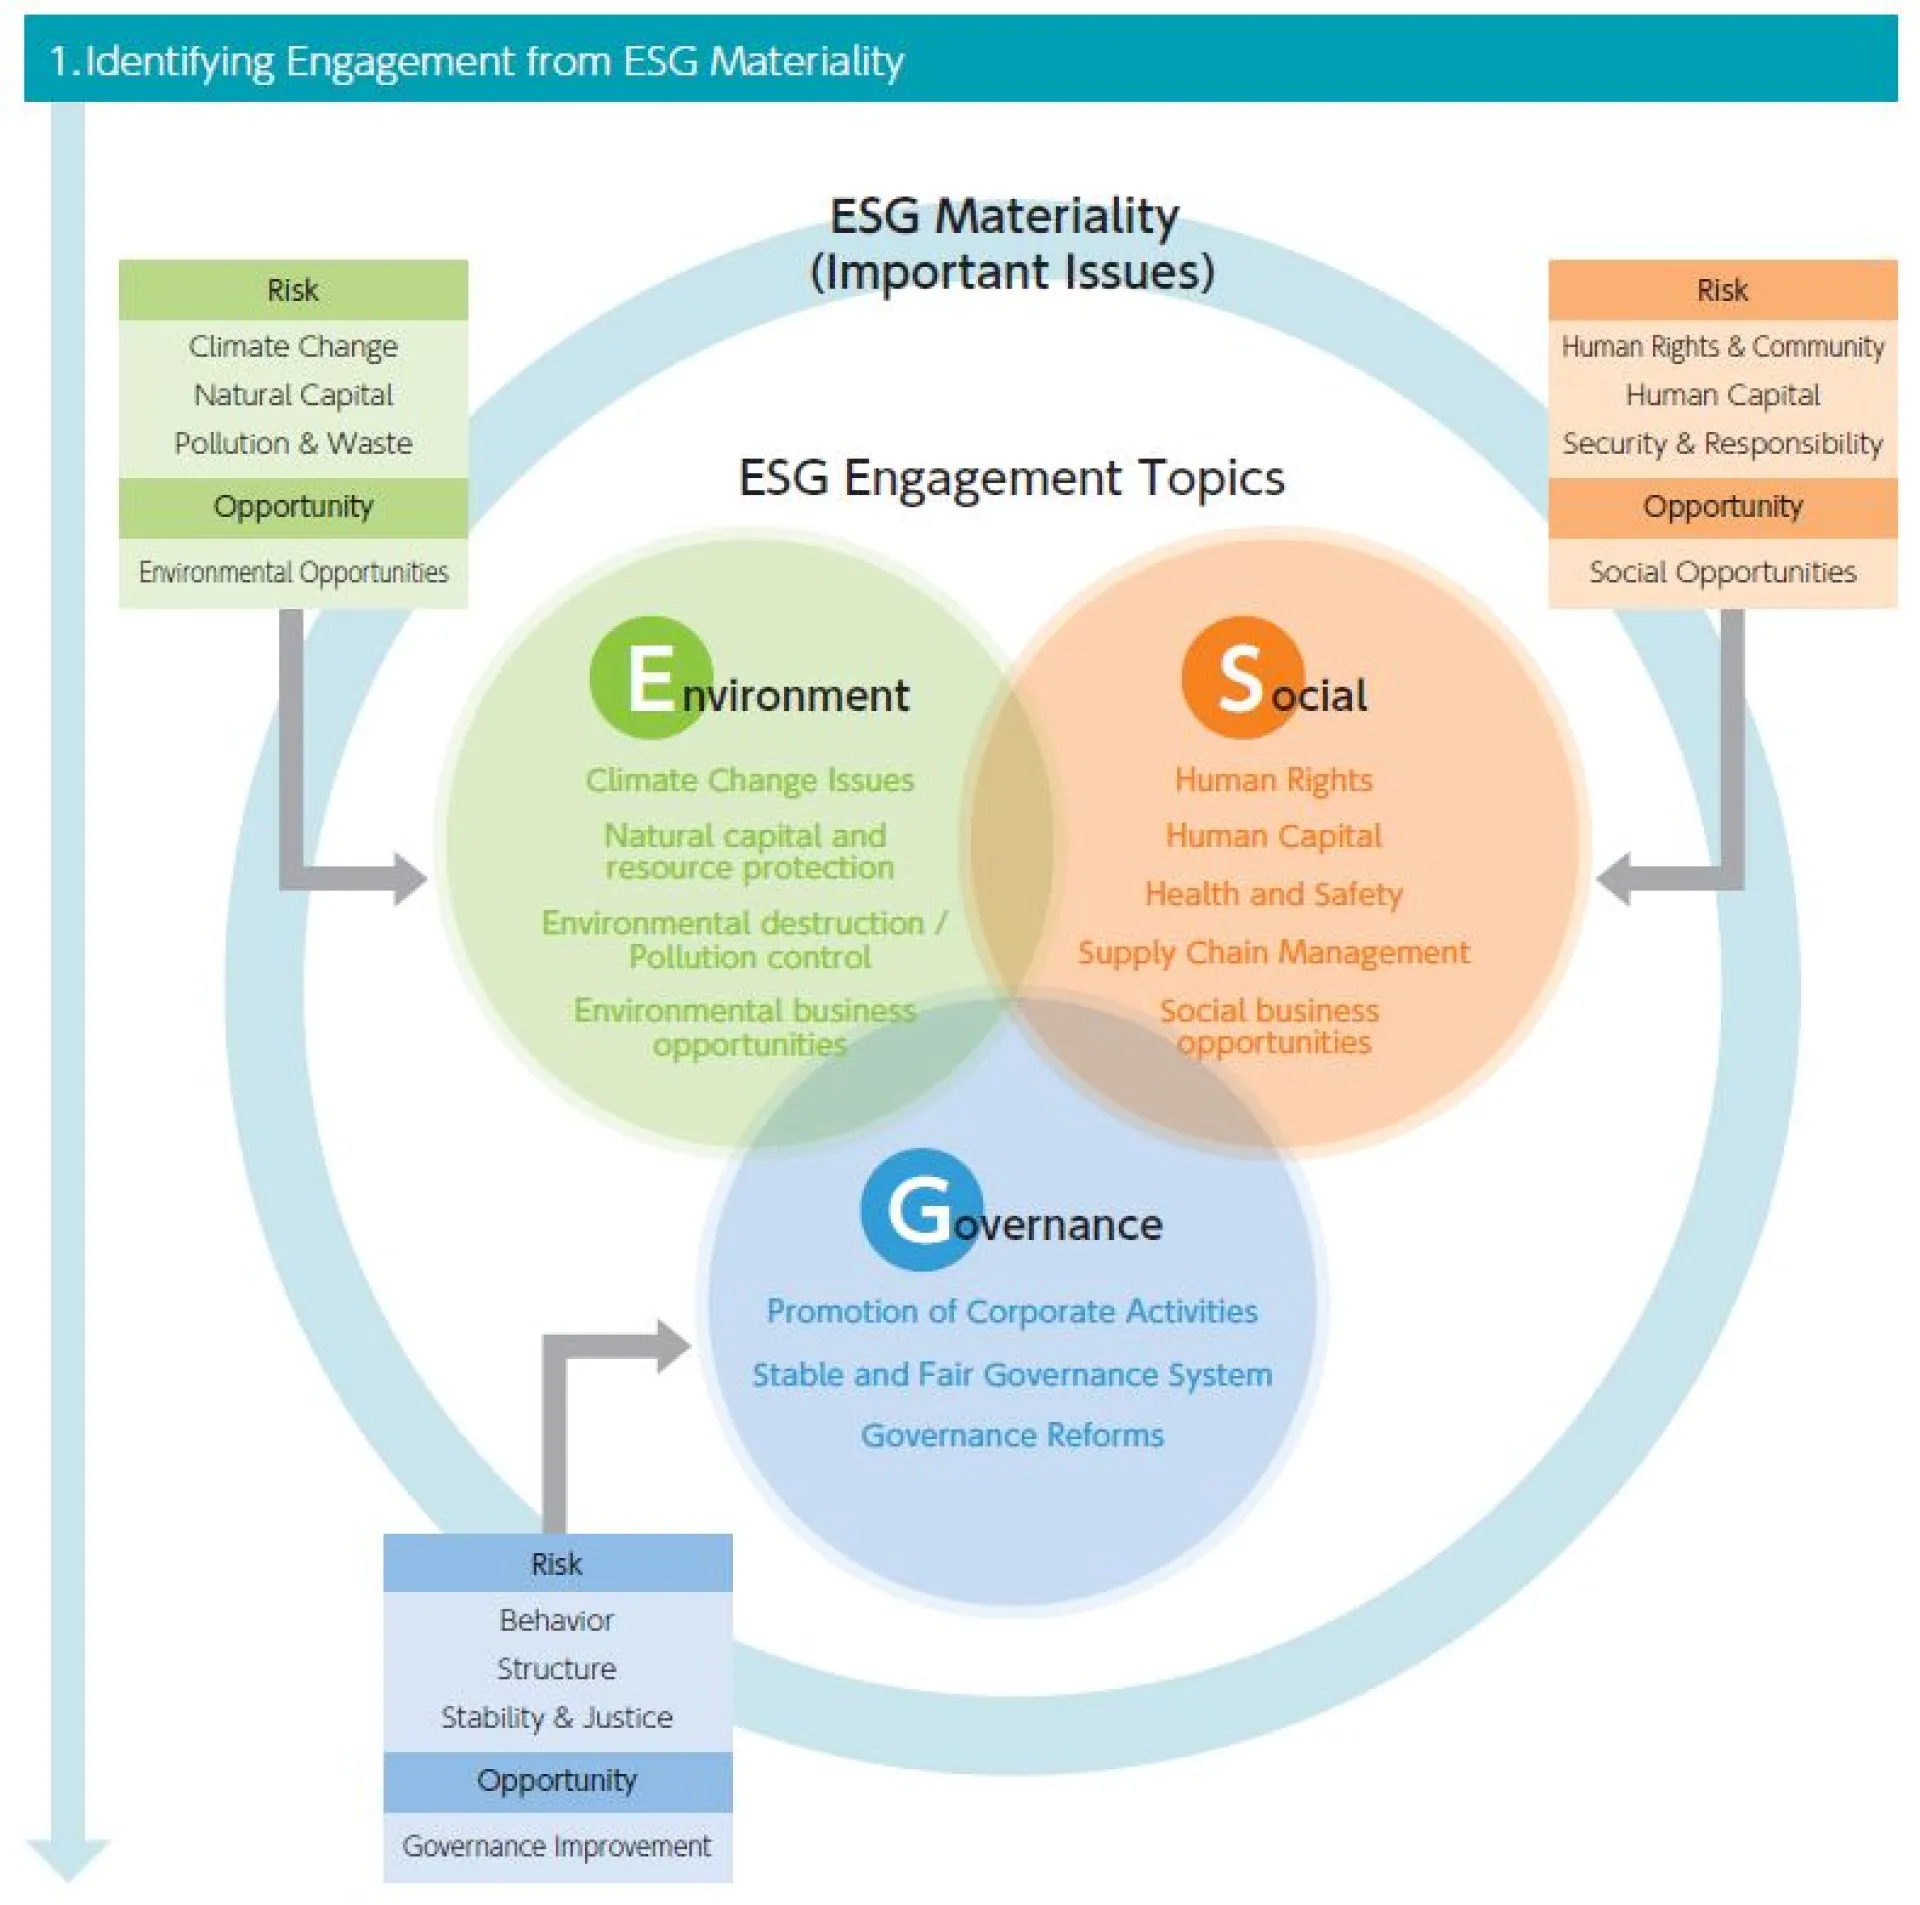 1) Identifying Engagement from ESG Materiality